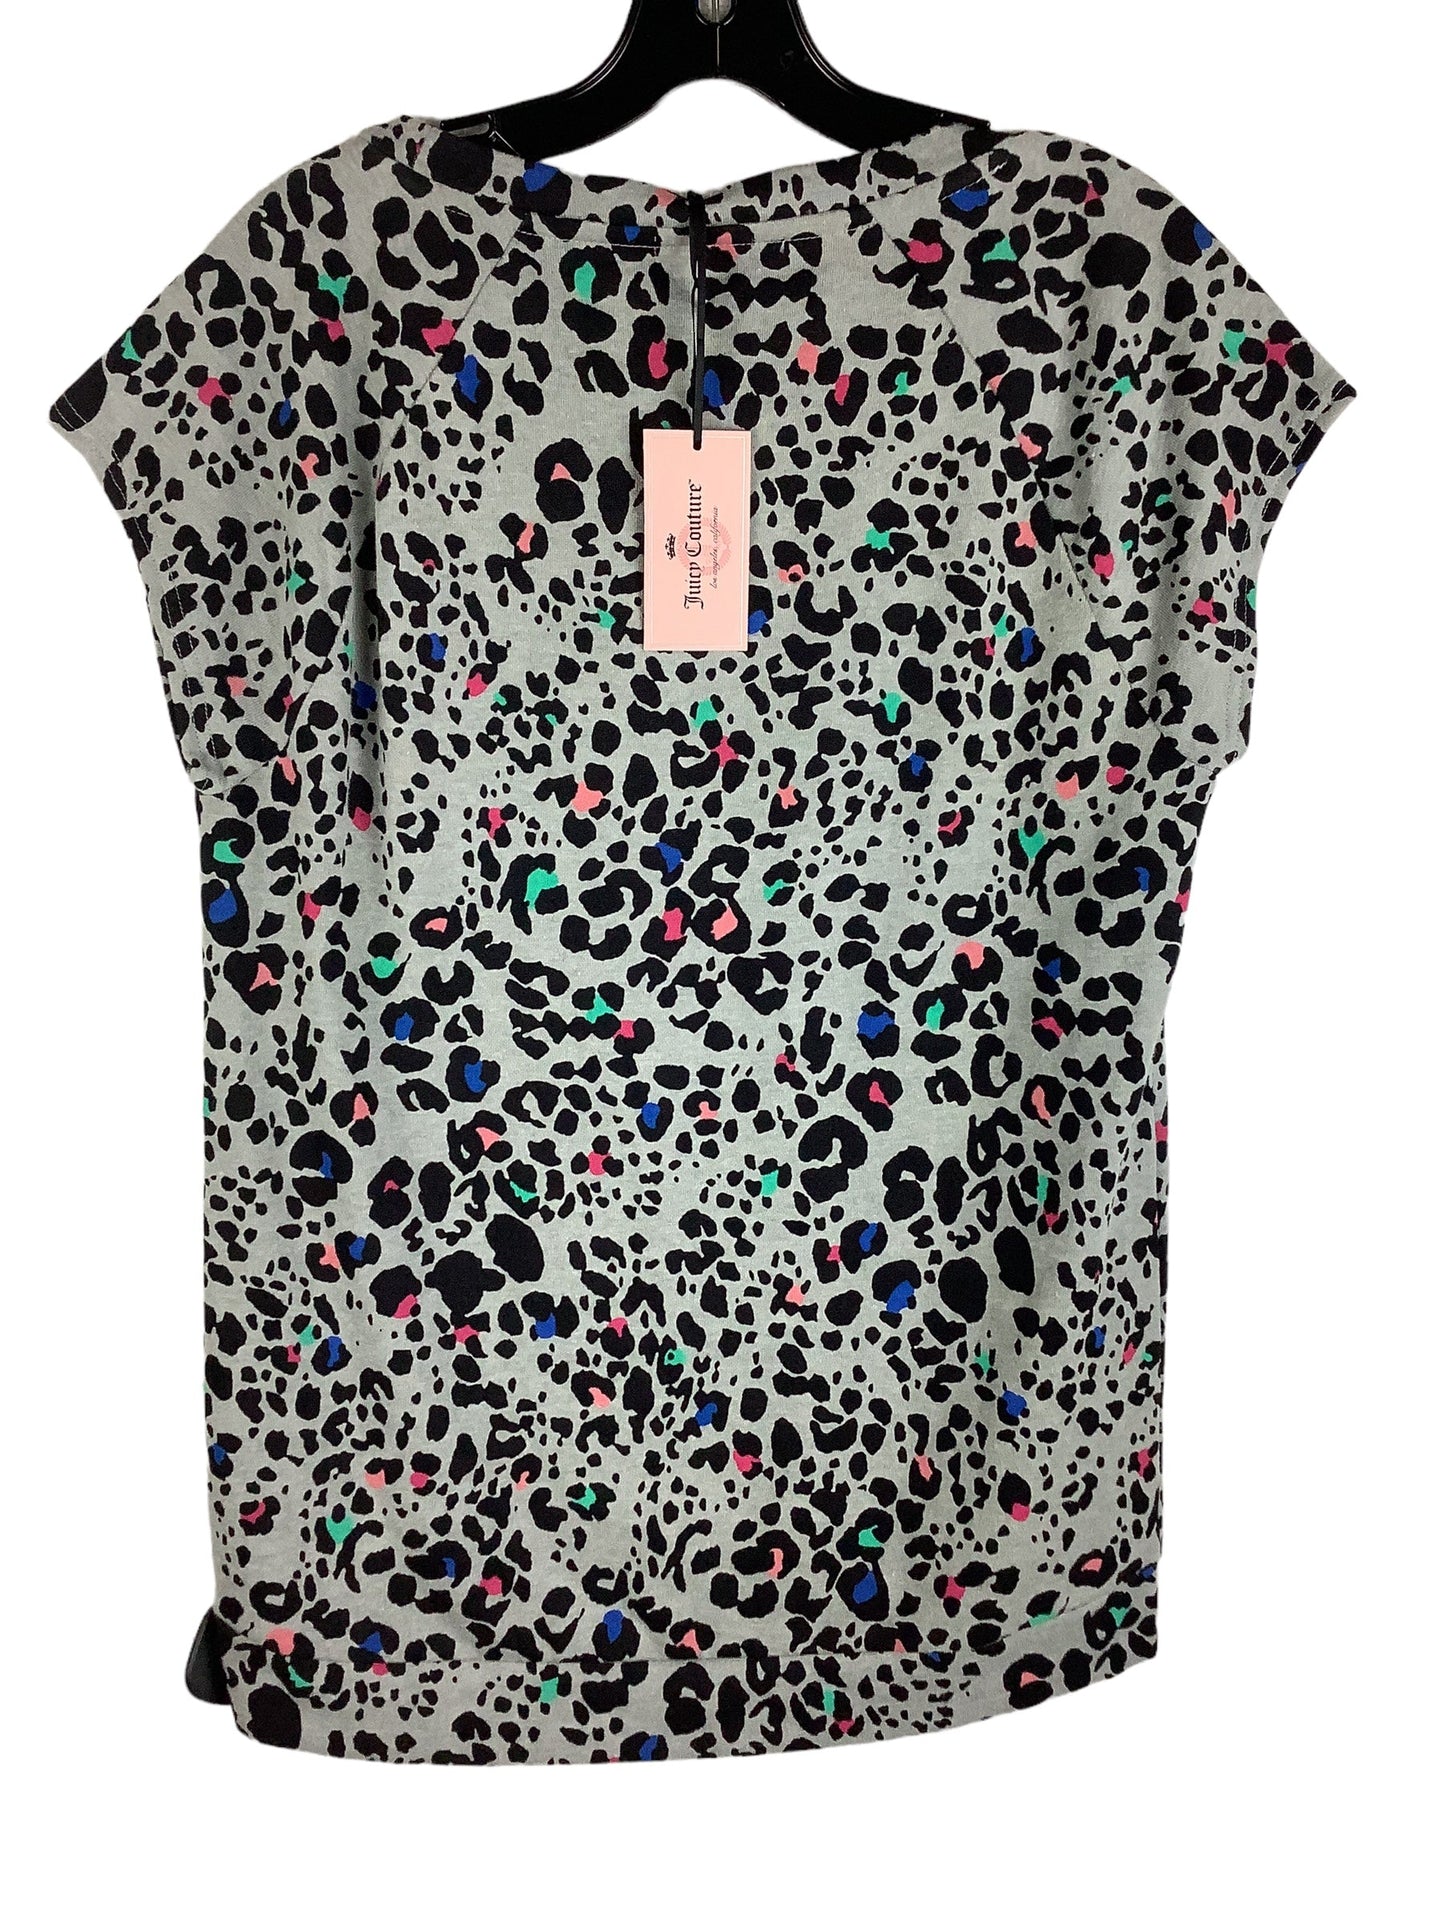 Top Short Sleeve By Juicy Couture  Size: S